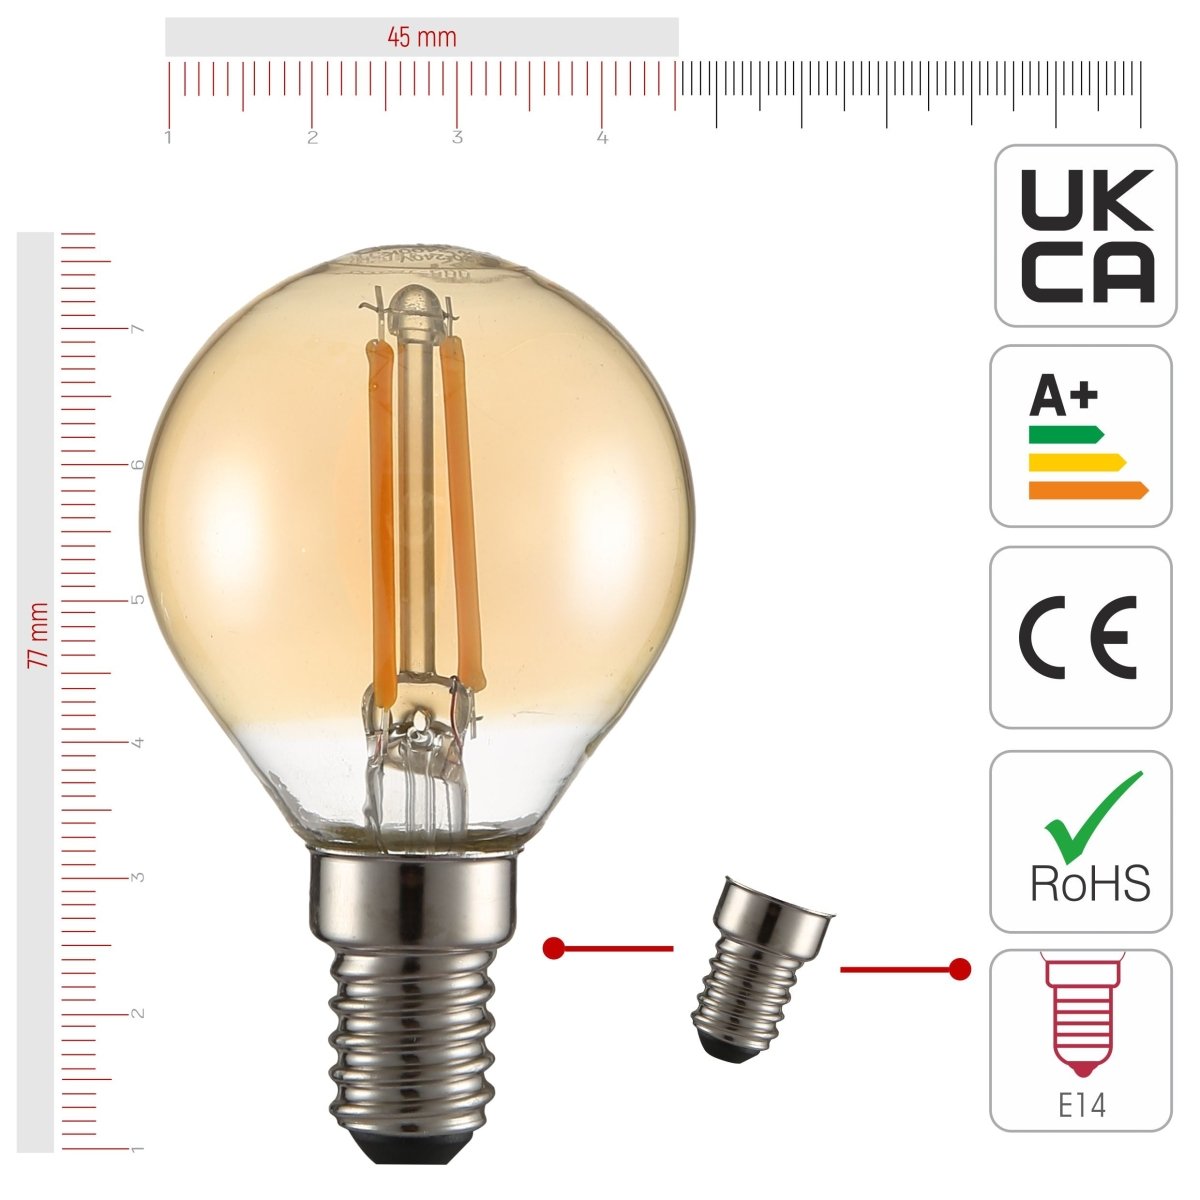 Size and certifications of LED Filament Bulb P45 Golf Ball E14 Small Edison Screw 2W 220lm Warm White 2400K Amber Pack of 4 | TEKLED 583-150222